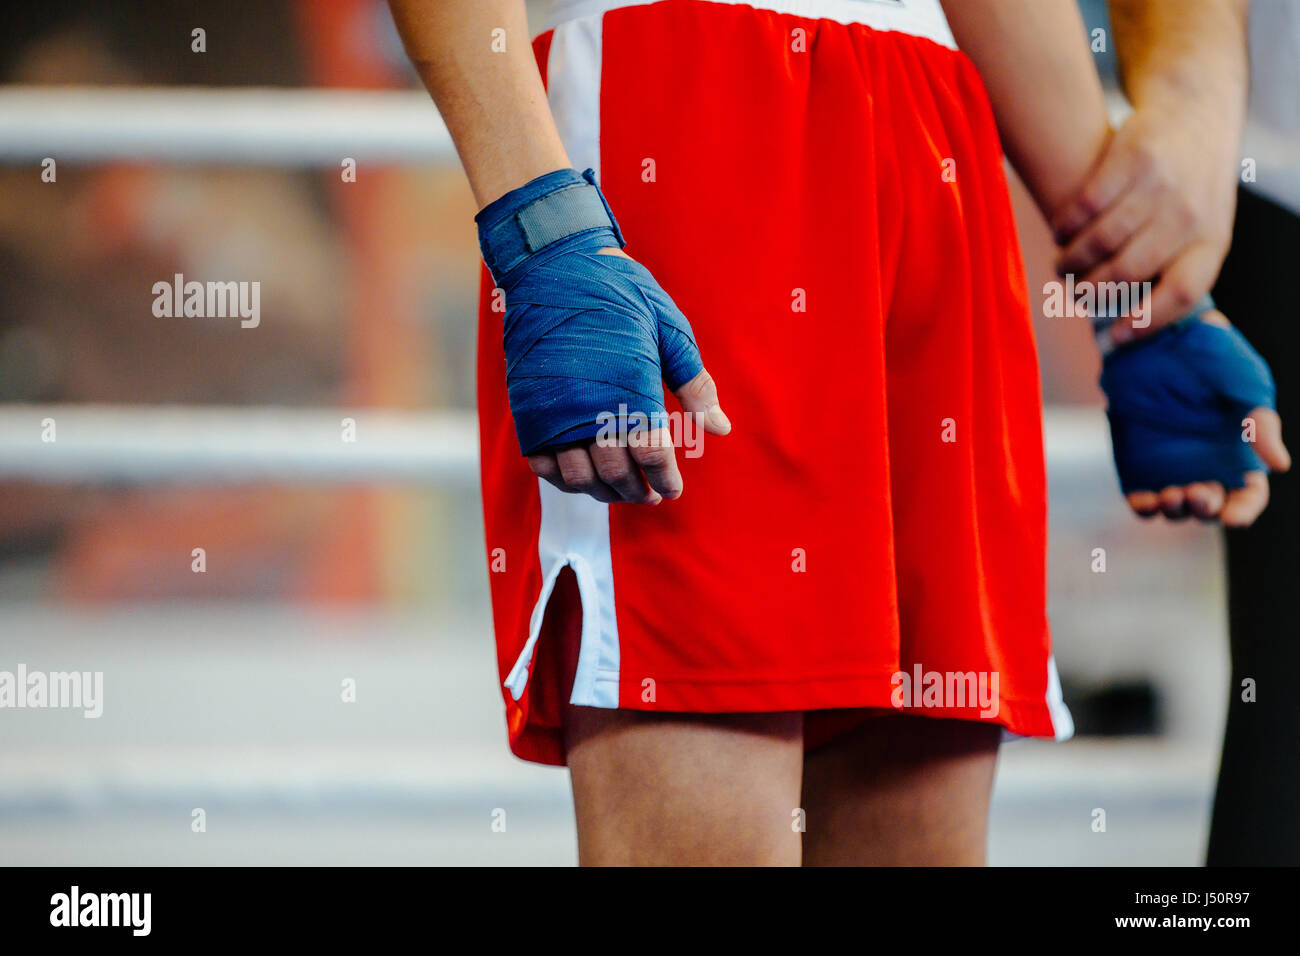 winner announced in boxing fight in ring Stock Photo